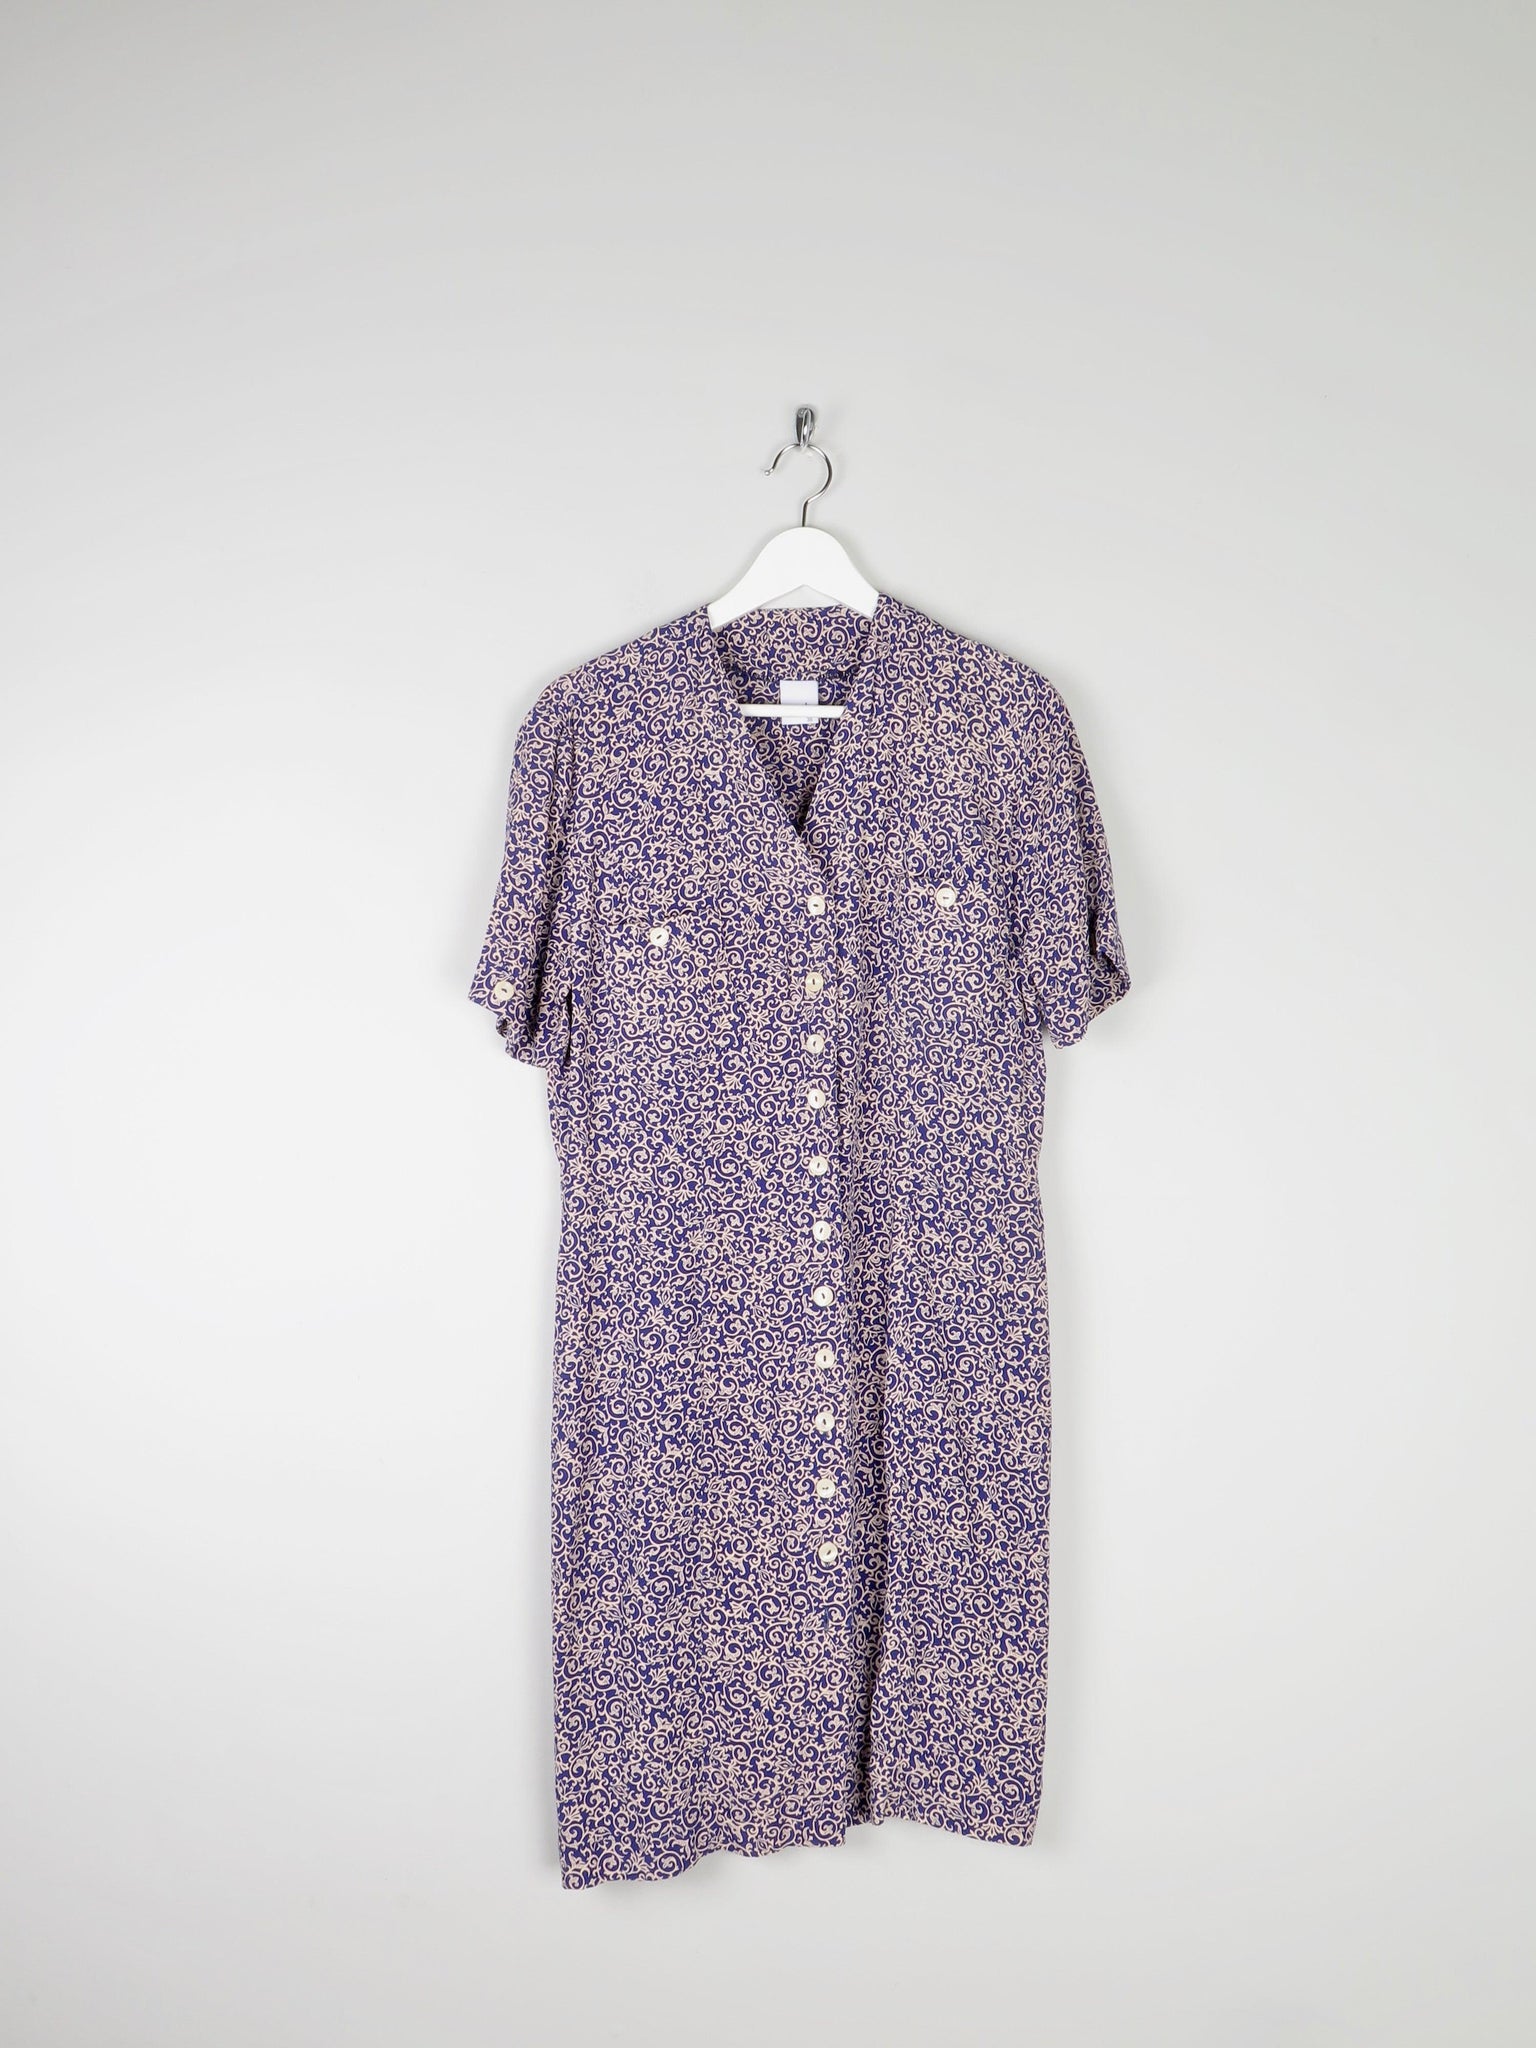 Navy Printed Knee Lenght Button Down Dress 10 - The Harlequin